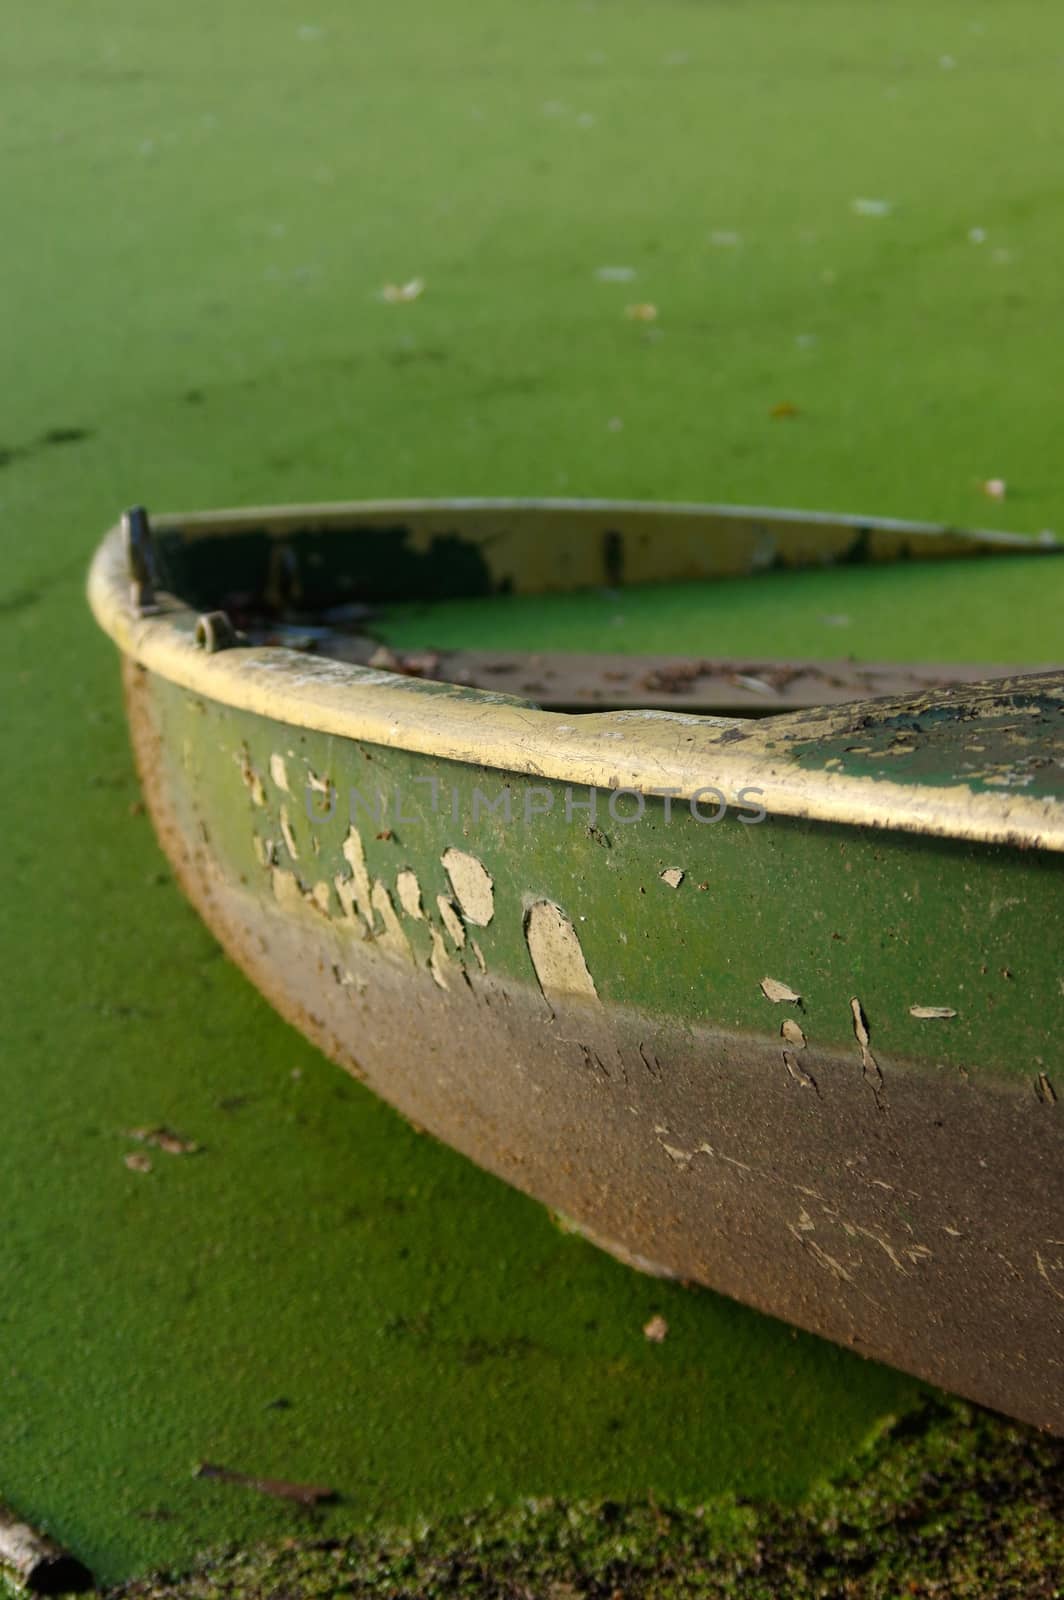 close up of part of green rowing boat submerged in water with leaves.